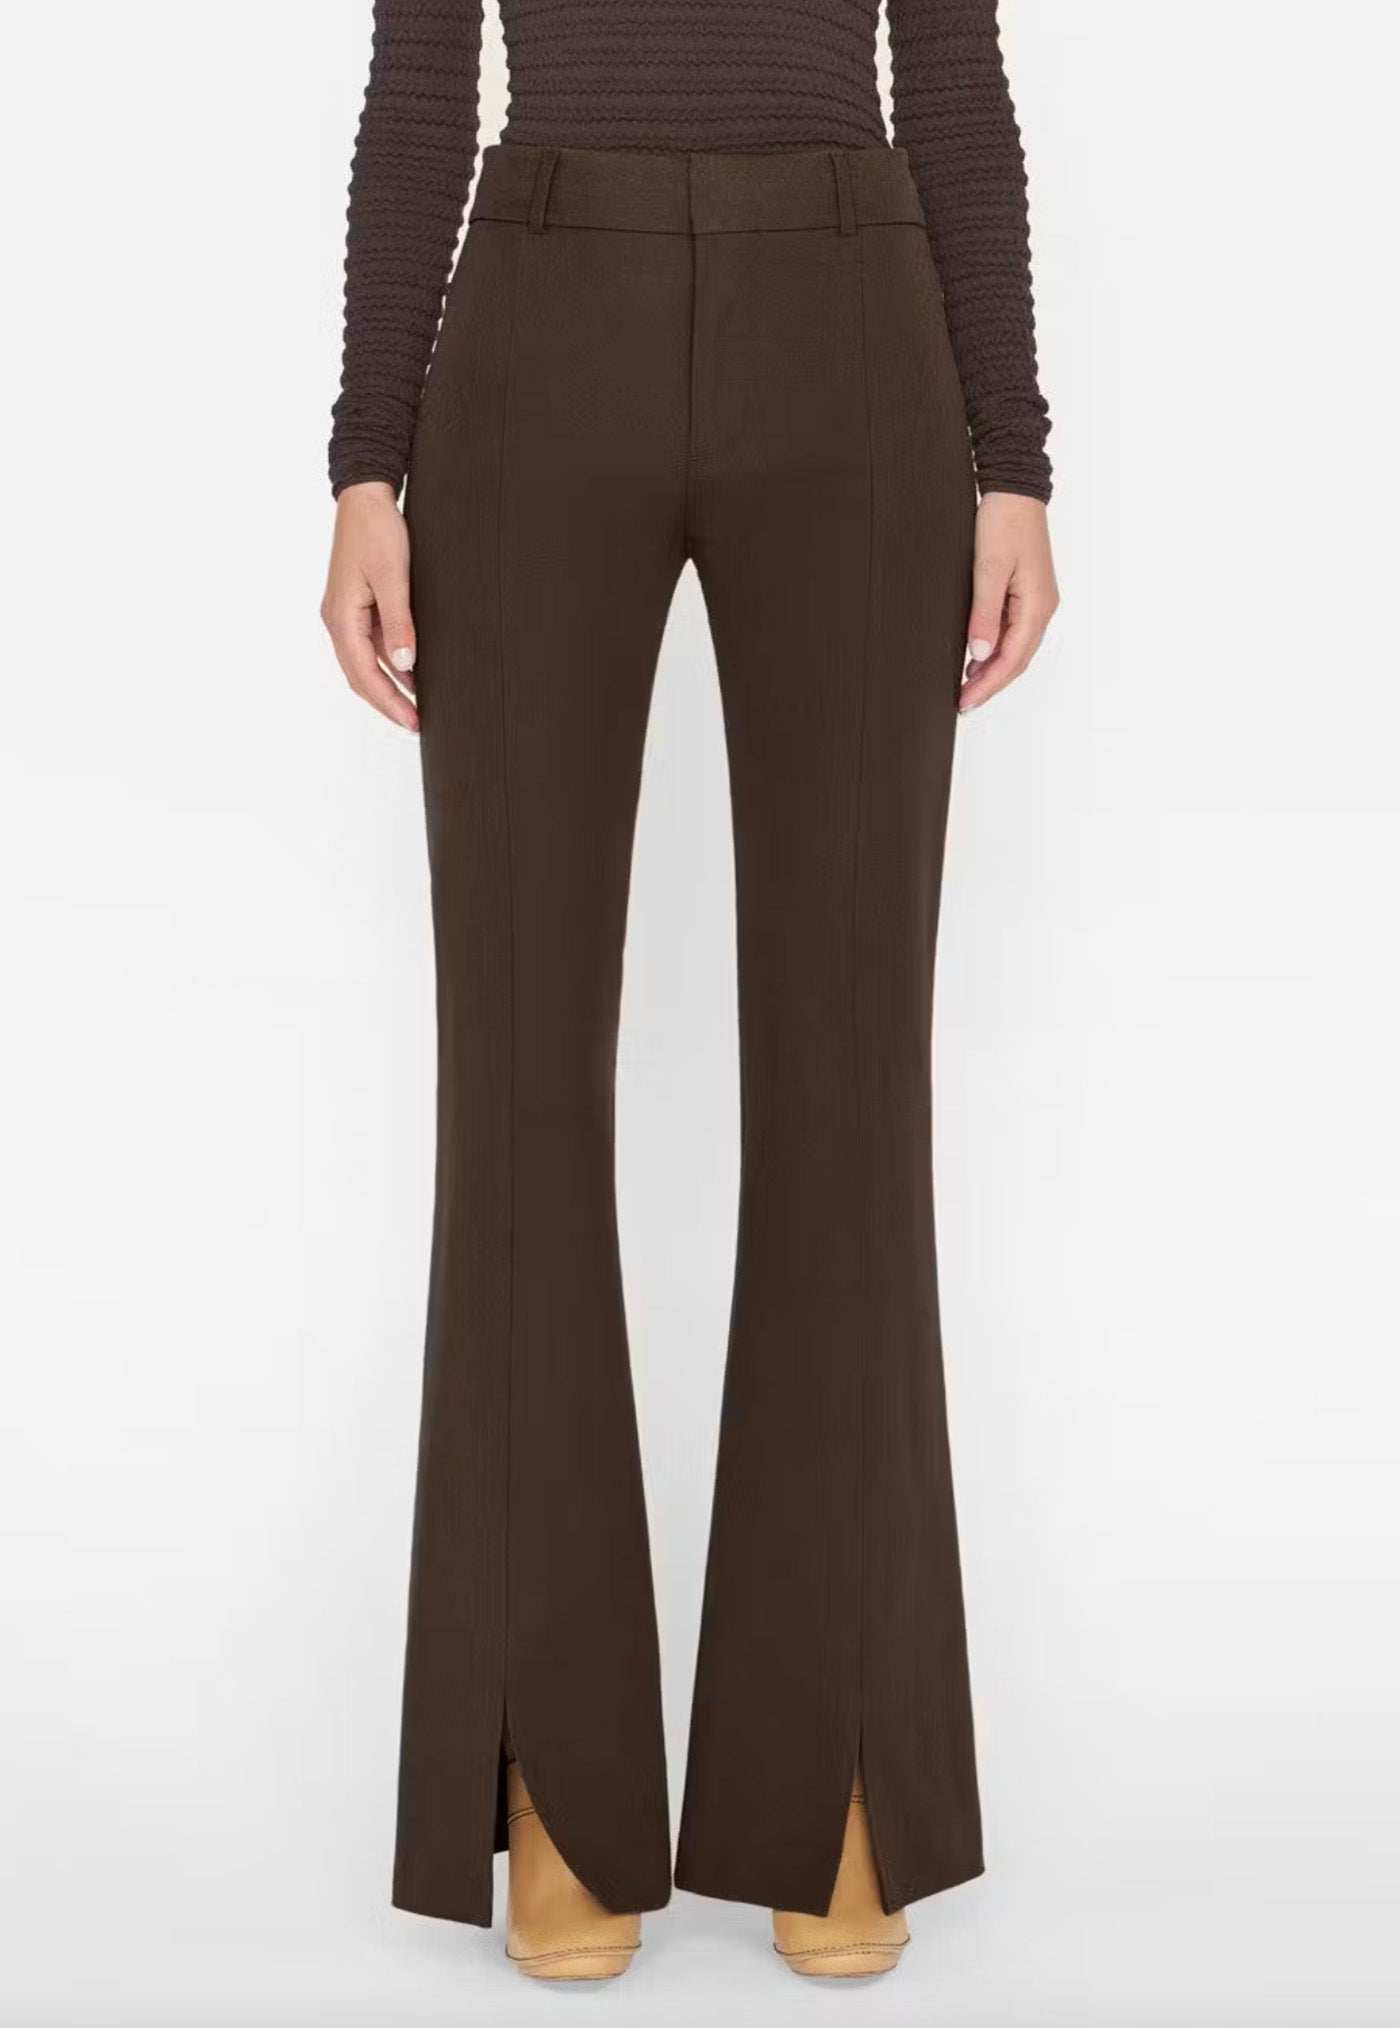 Le High Flare Split Front Trouser - Espresso sold by Angel Divine